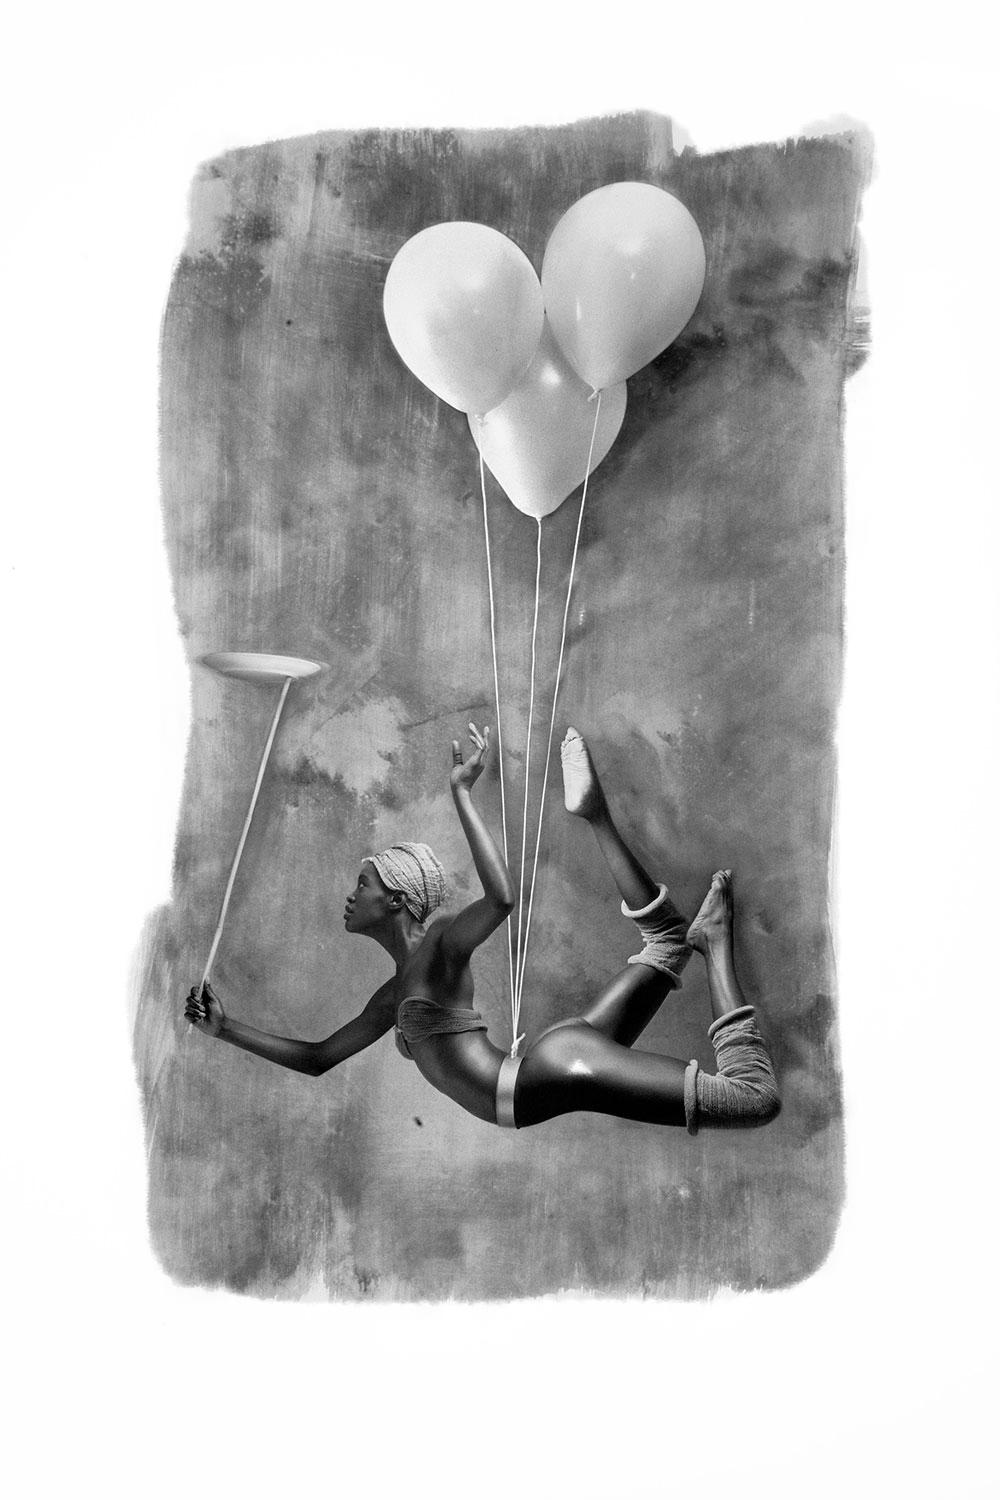 Uwe Ommer Black and White Photograph - Les Acrobates V. Limited Edition Photograph